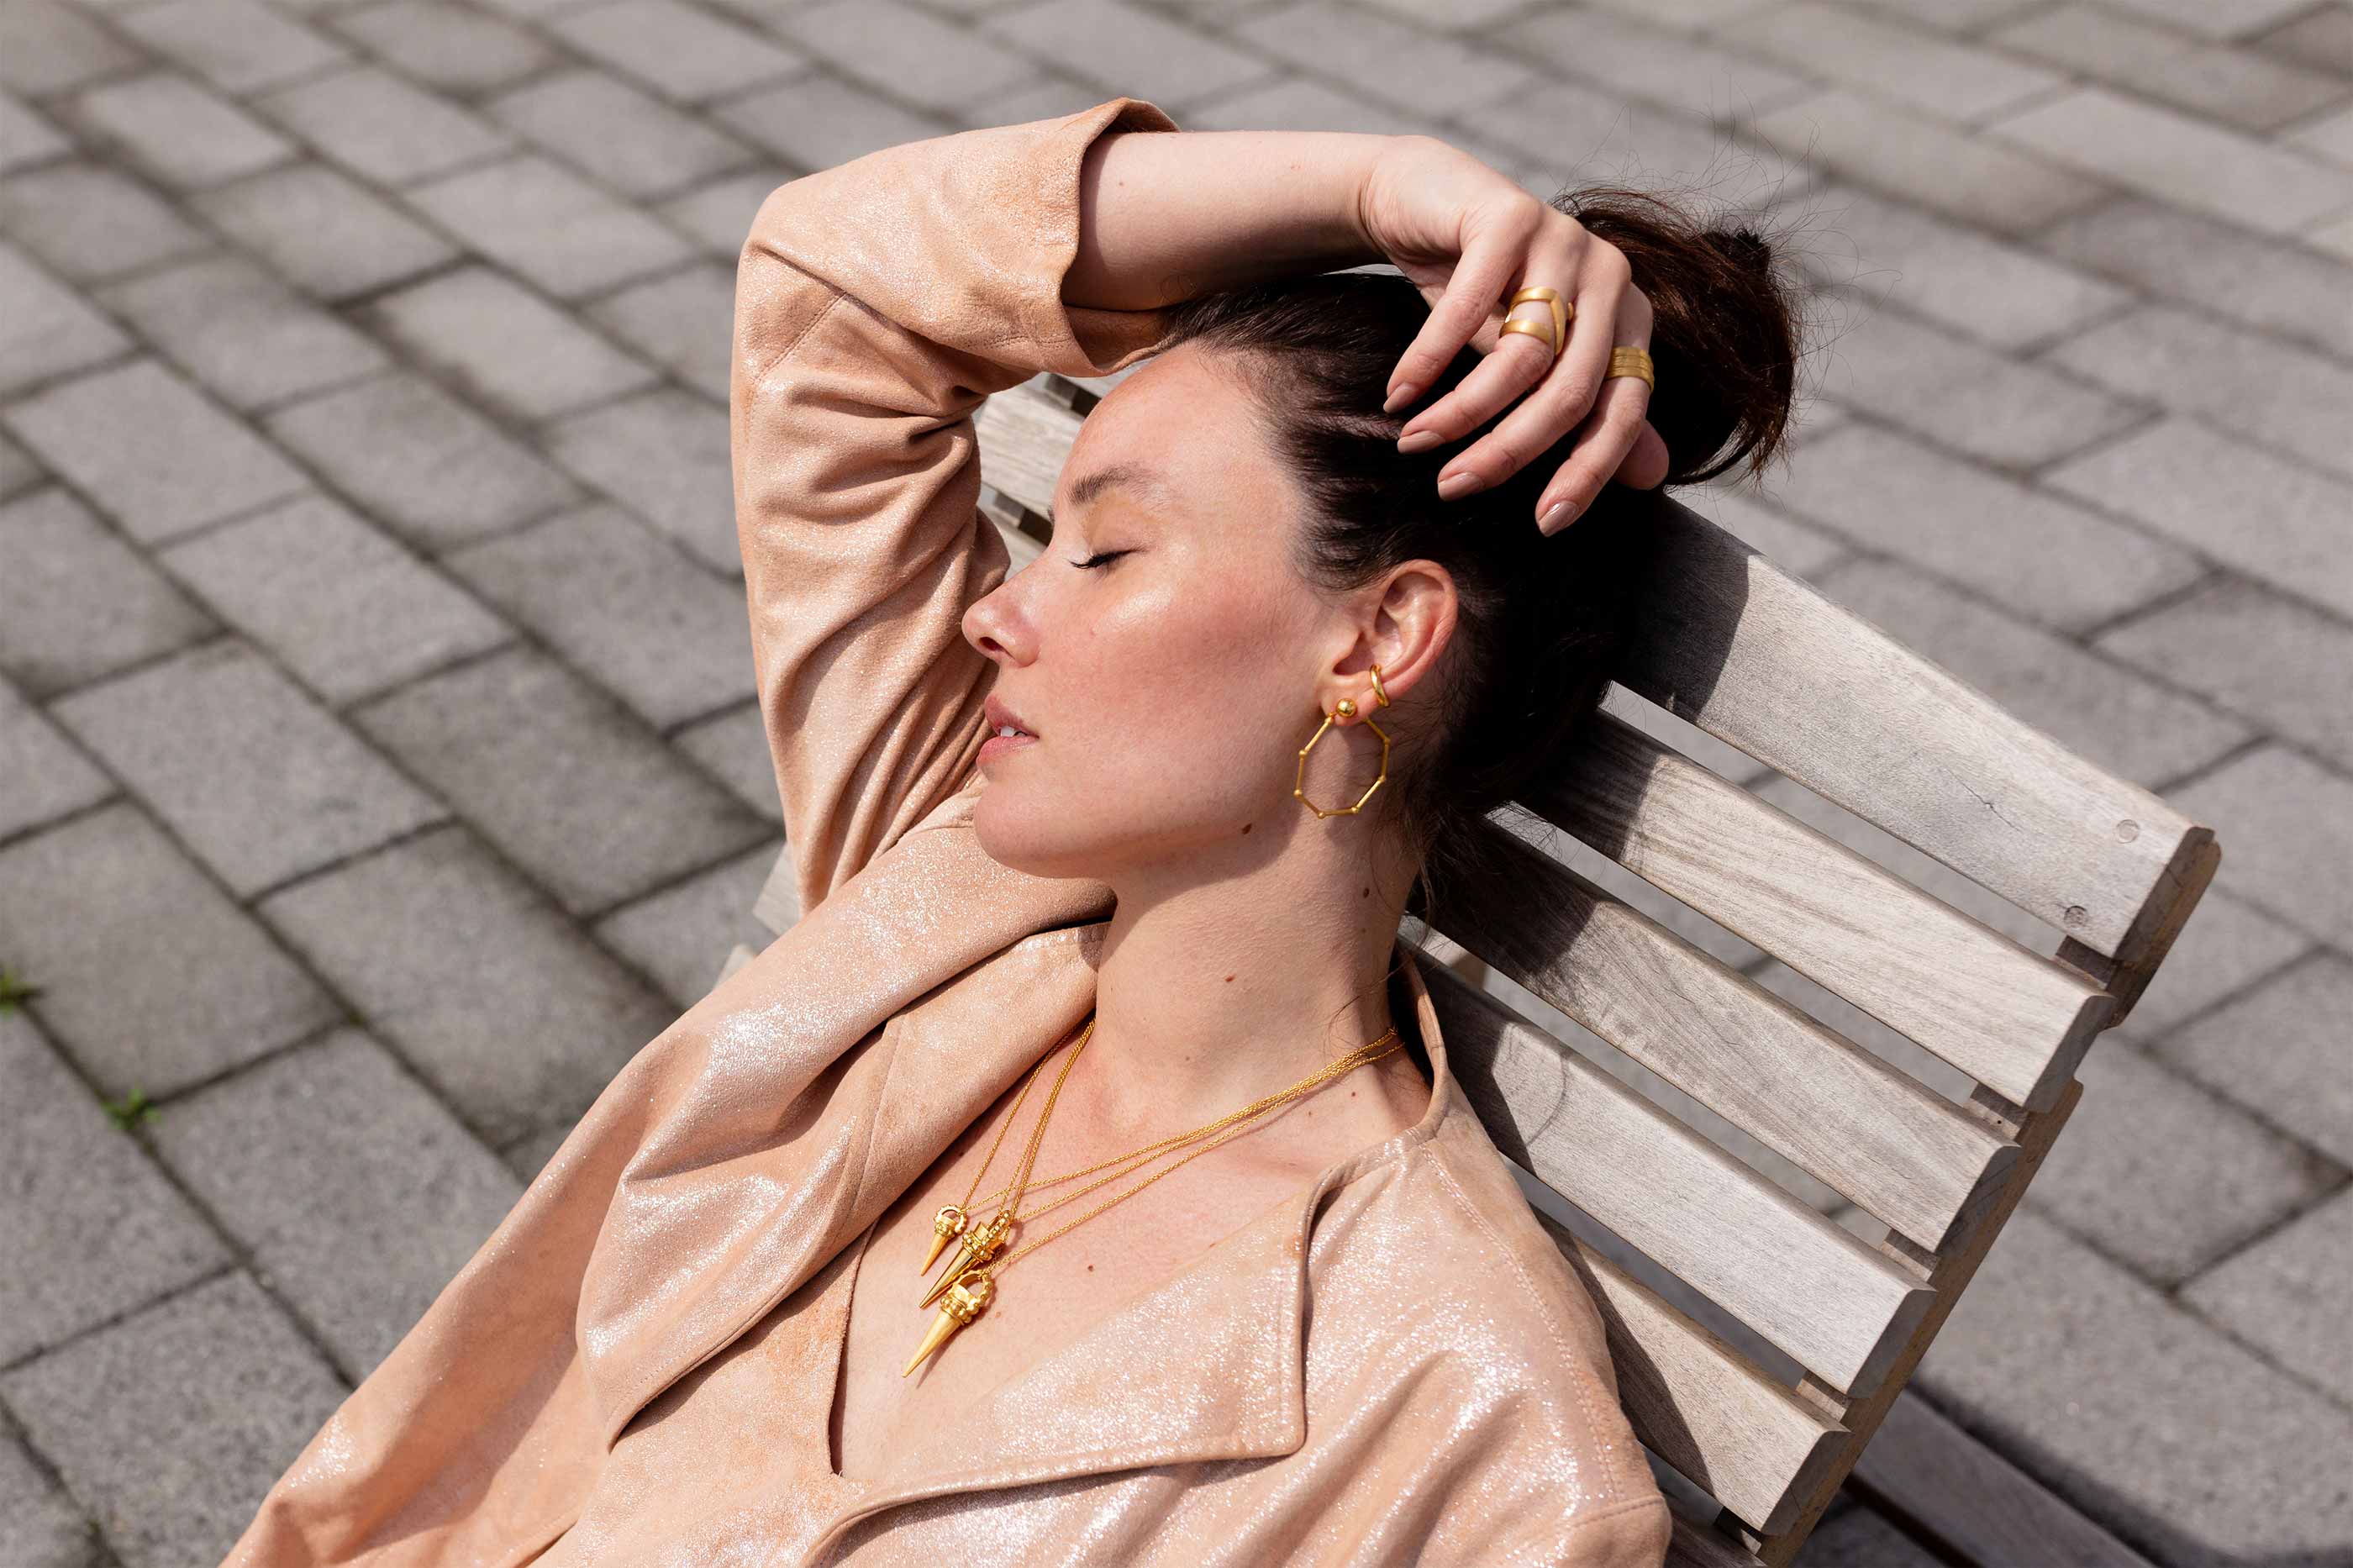 Alyson Eastman is wearing Auvere 22 and 24 karat gold jewelry